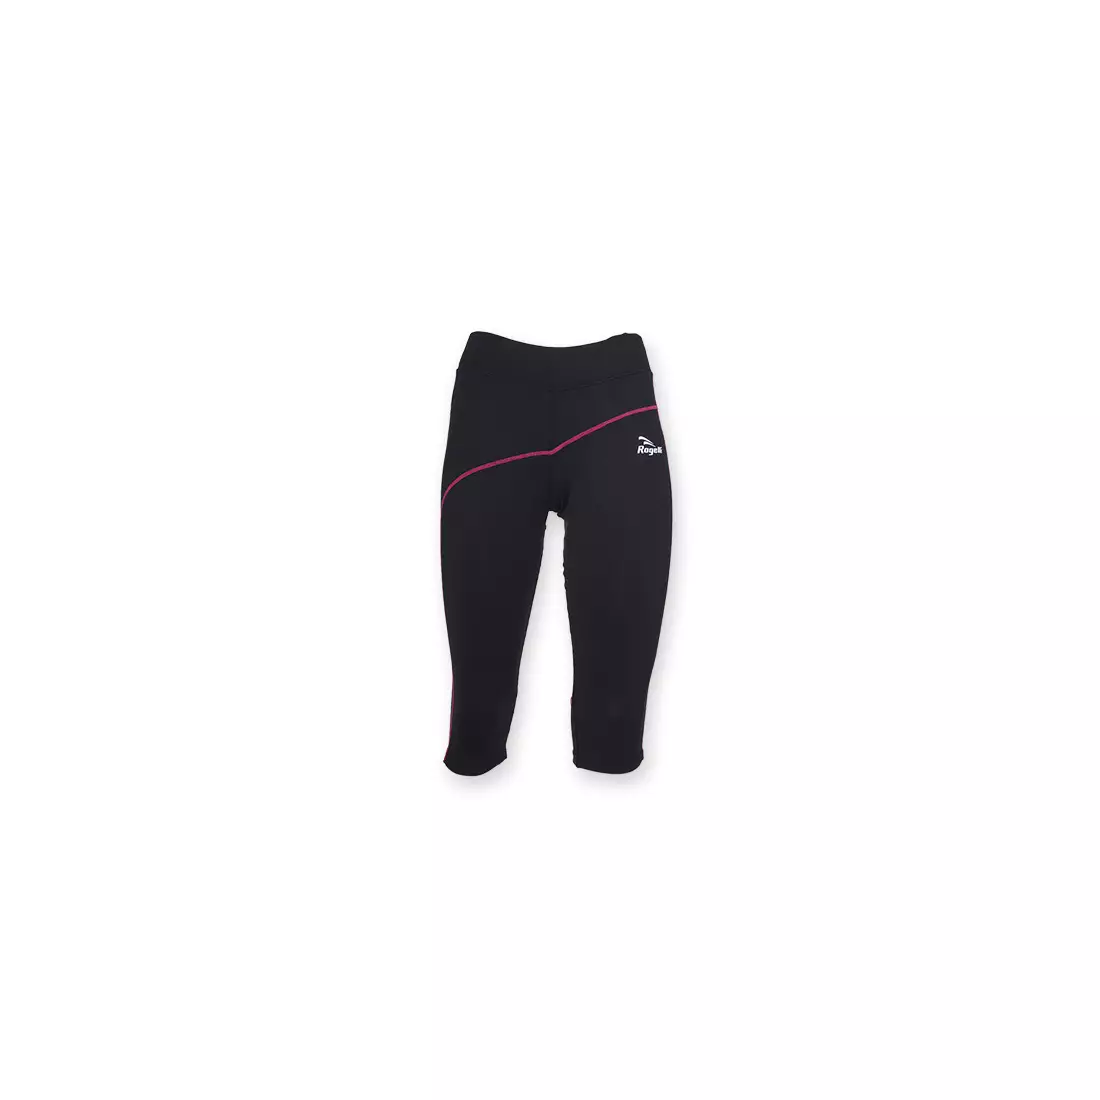 ROGELLI RUN MADILON - women's 3/4 running shorts - color: Black and pink